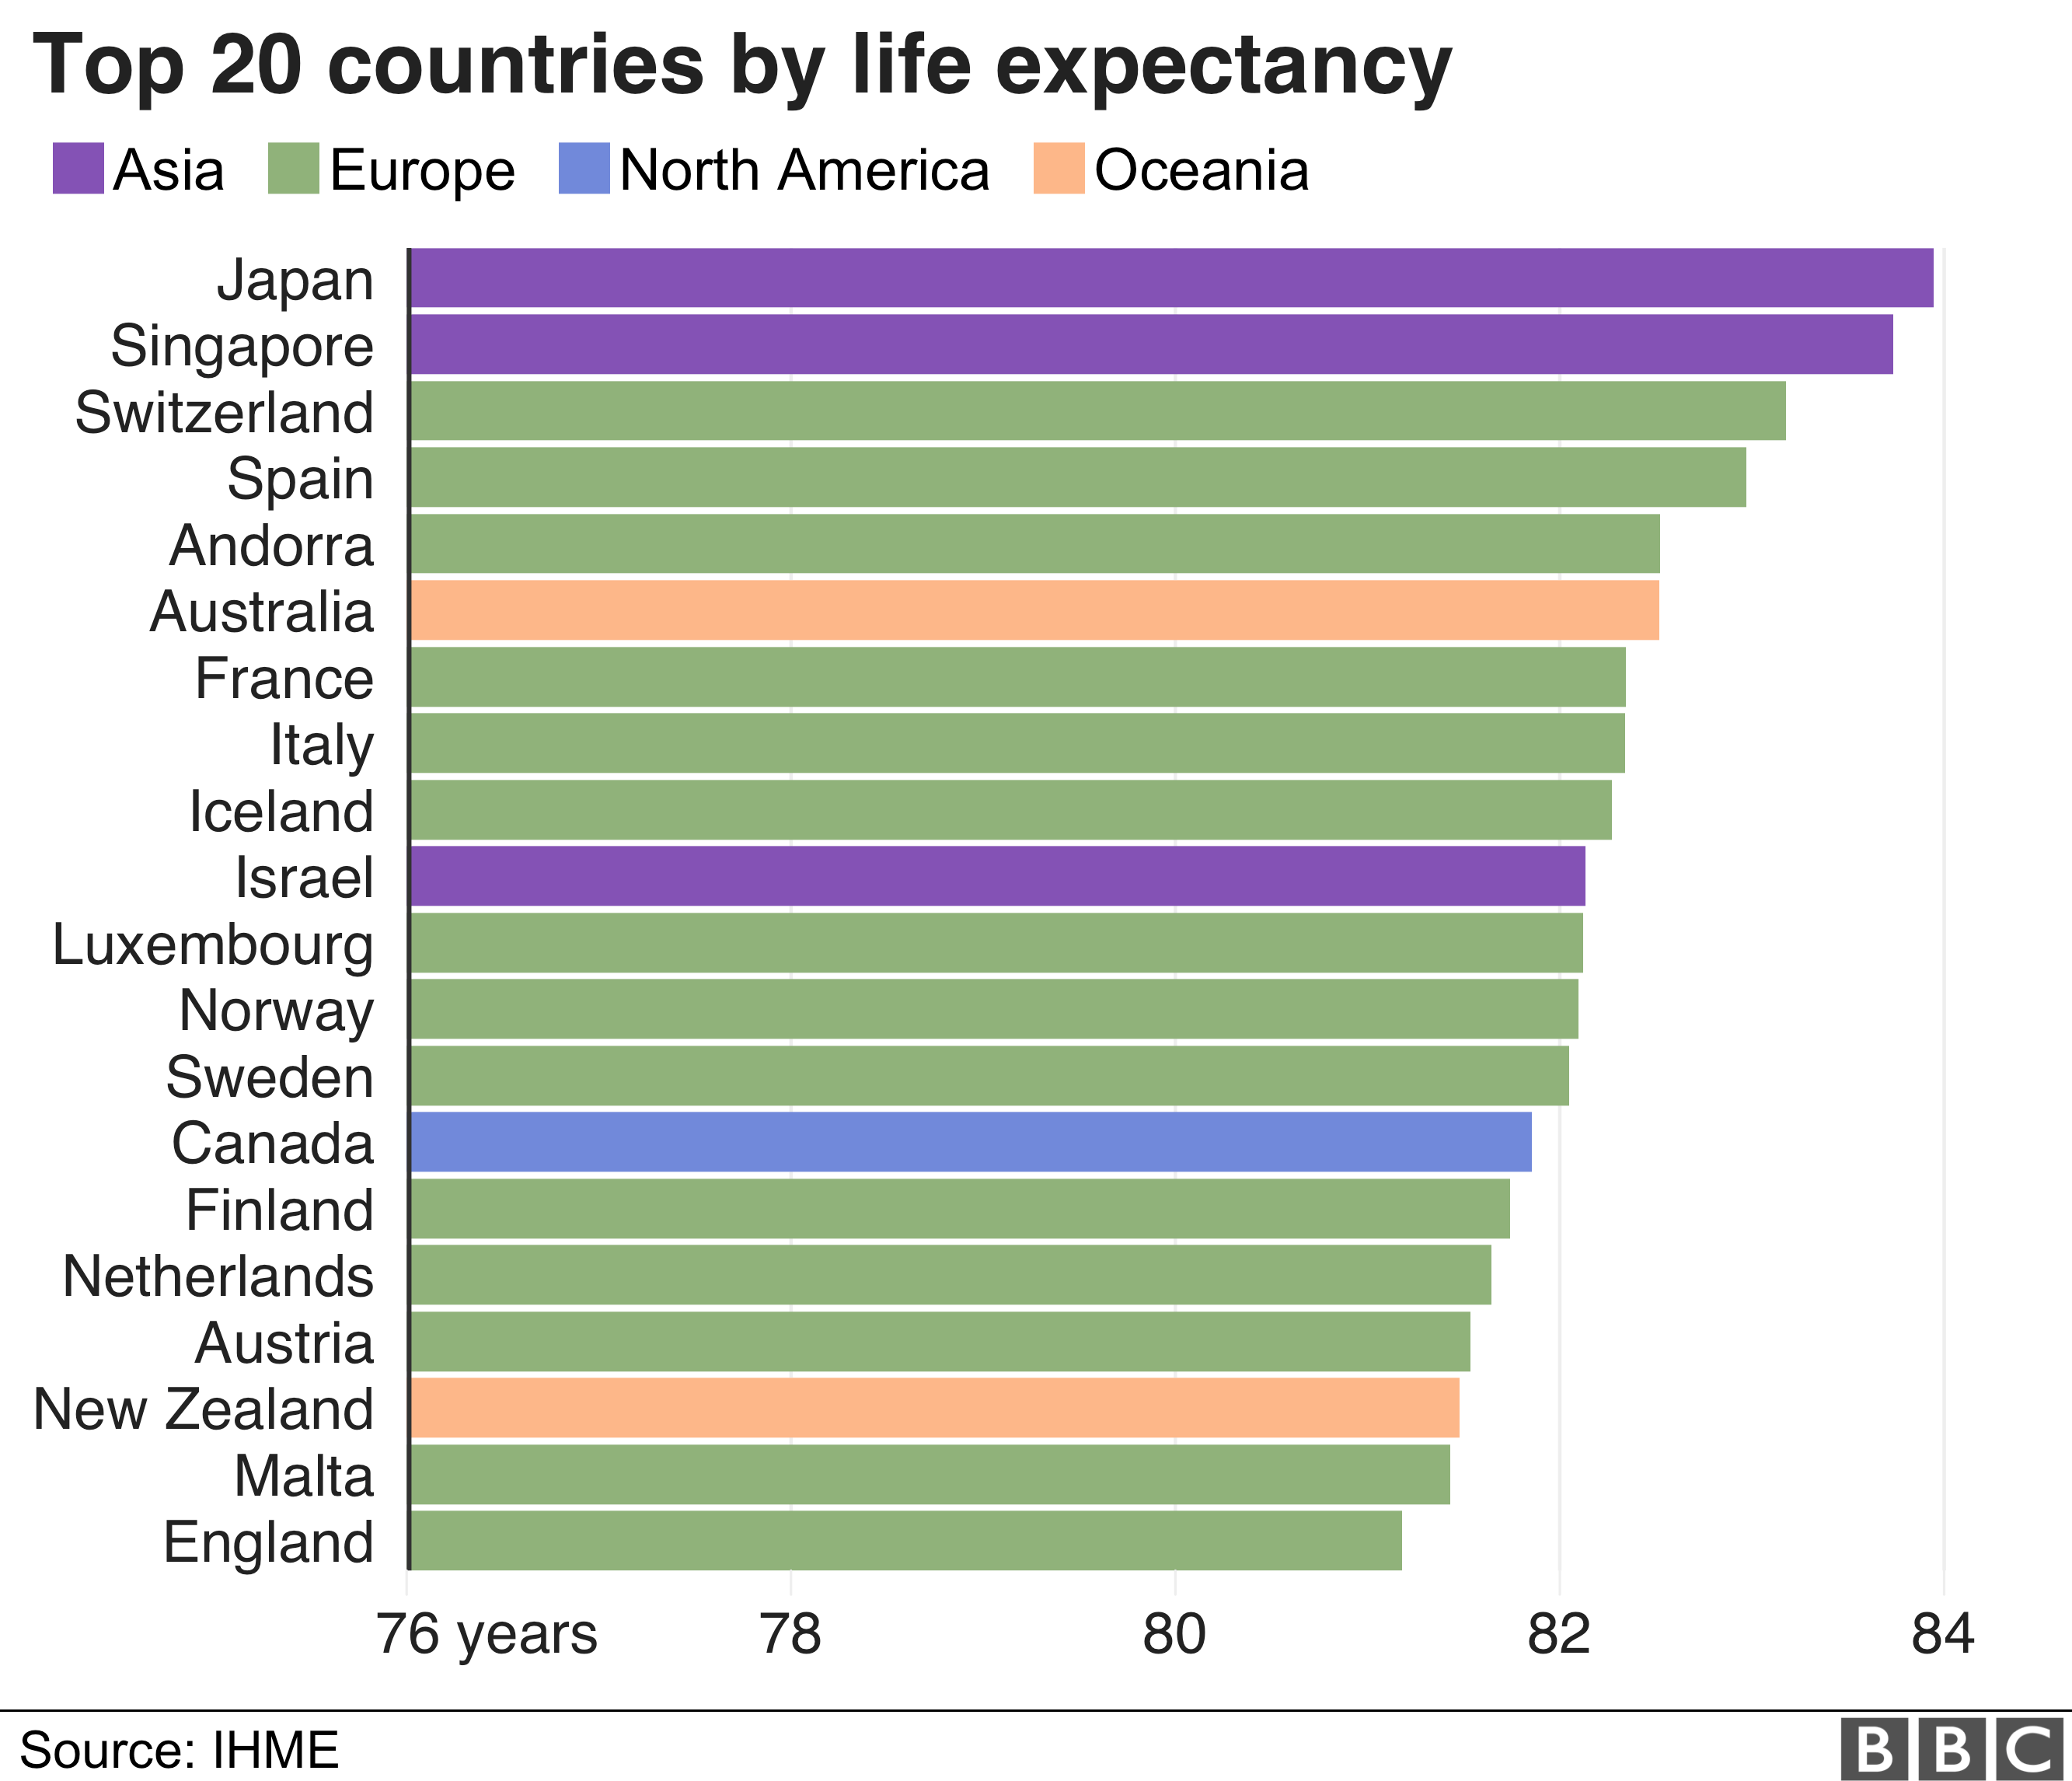 The top 20 countries in terms of life expectancy are mostly Western European countries